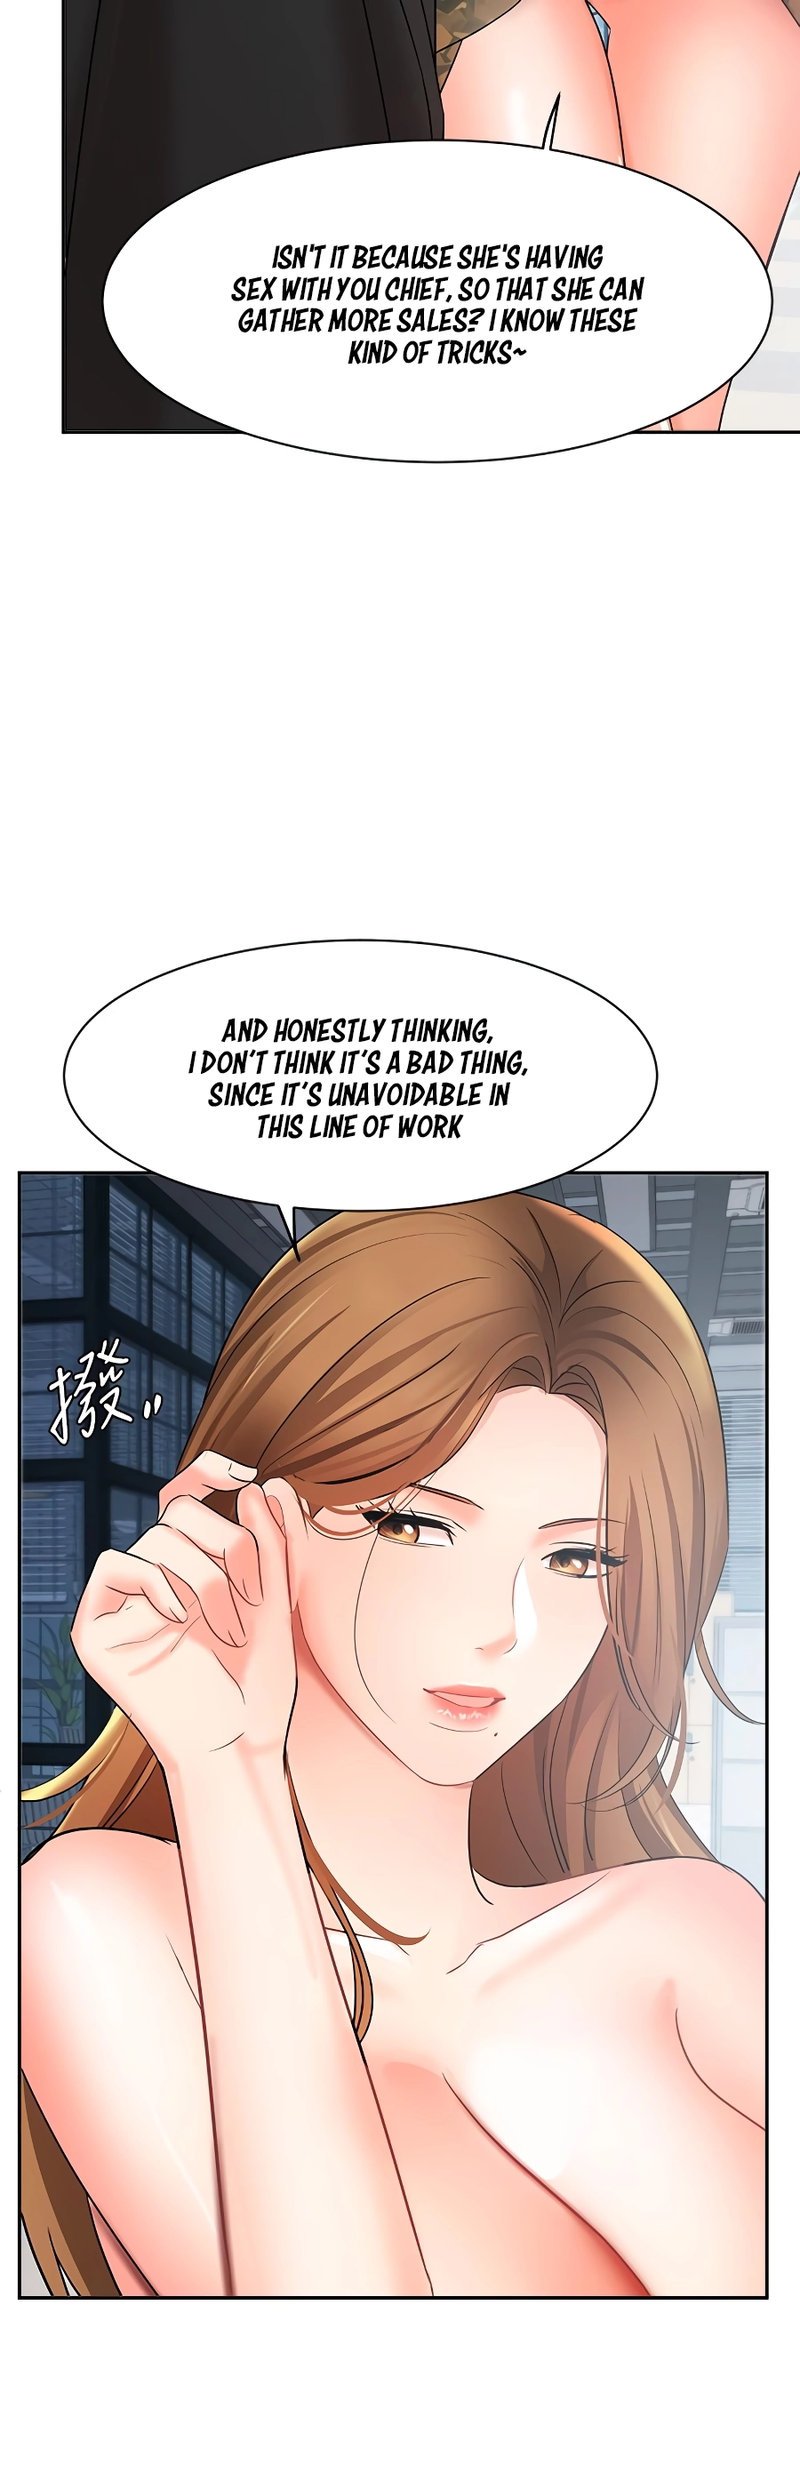 sold-out-girl-chap-39-15